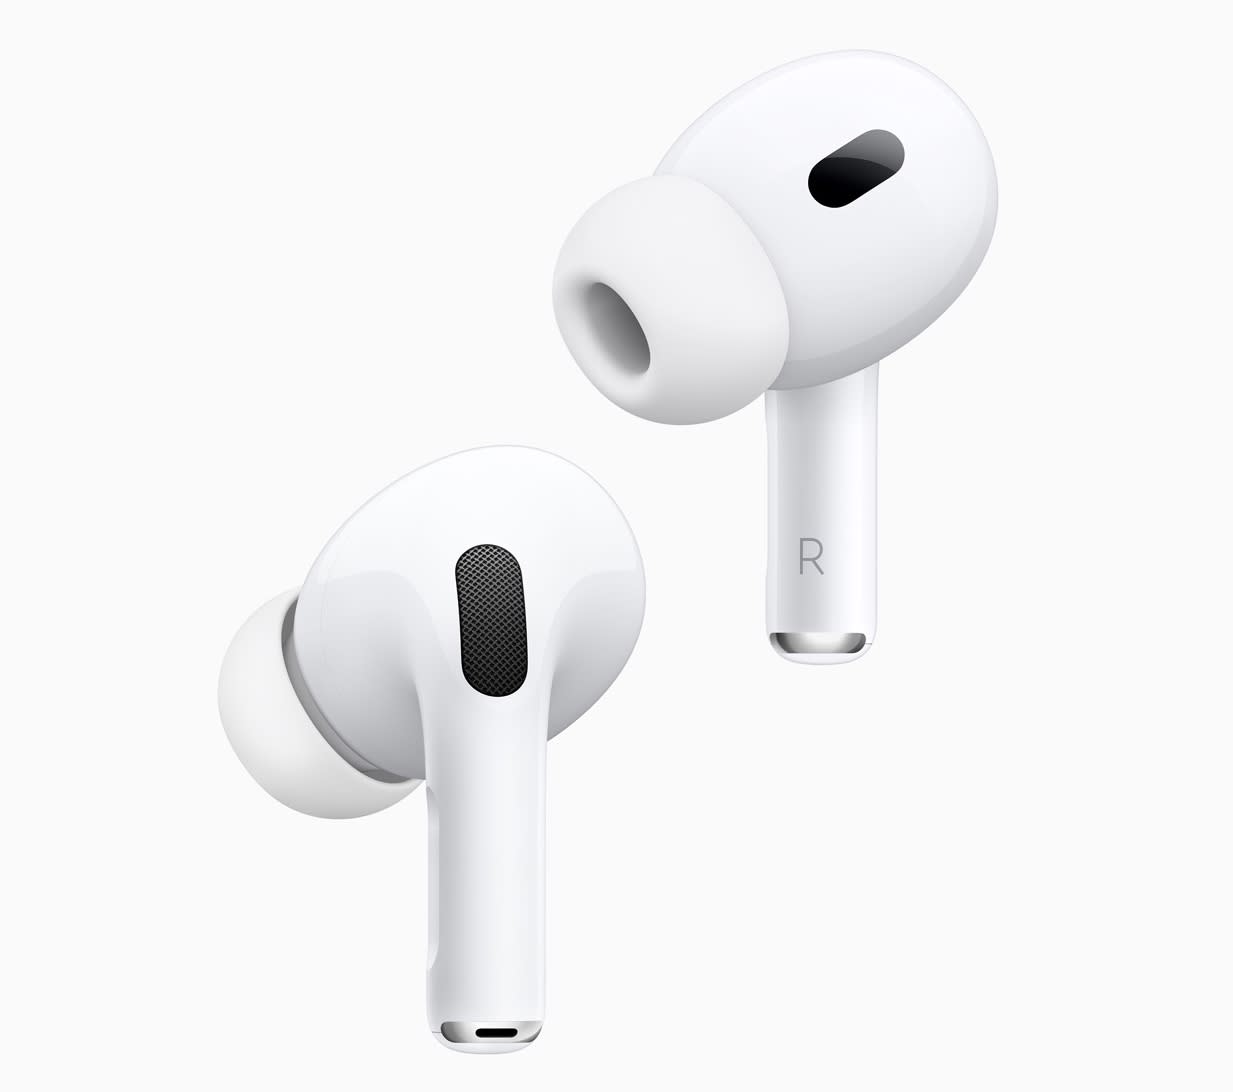 Apple's AirPods Pro get new touch controls and improved audio. (Image: Apple)